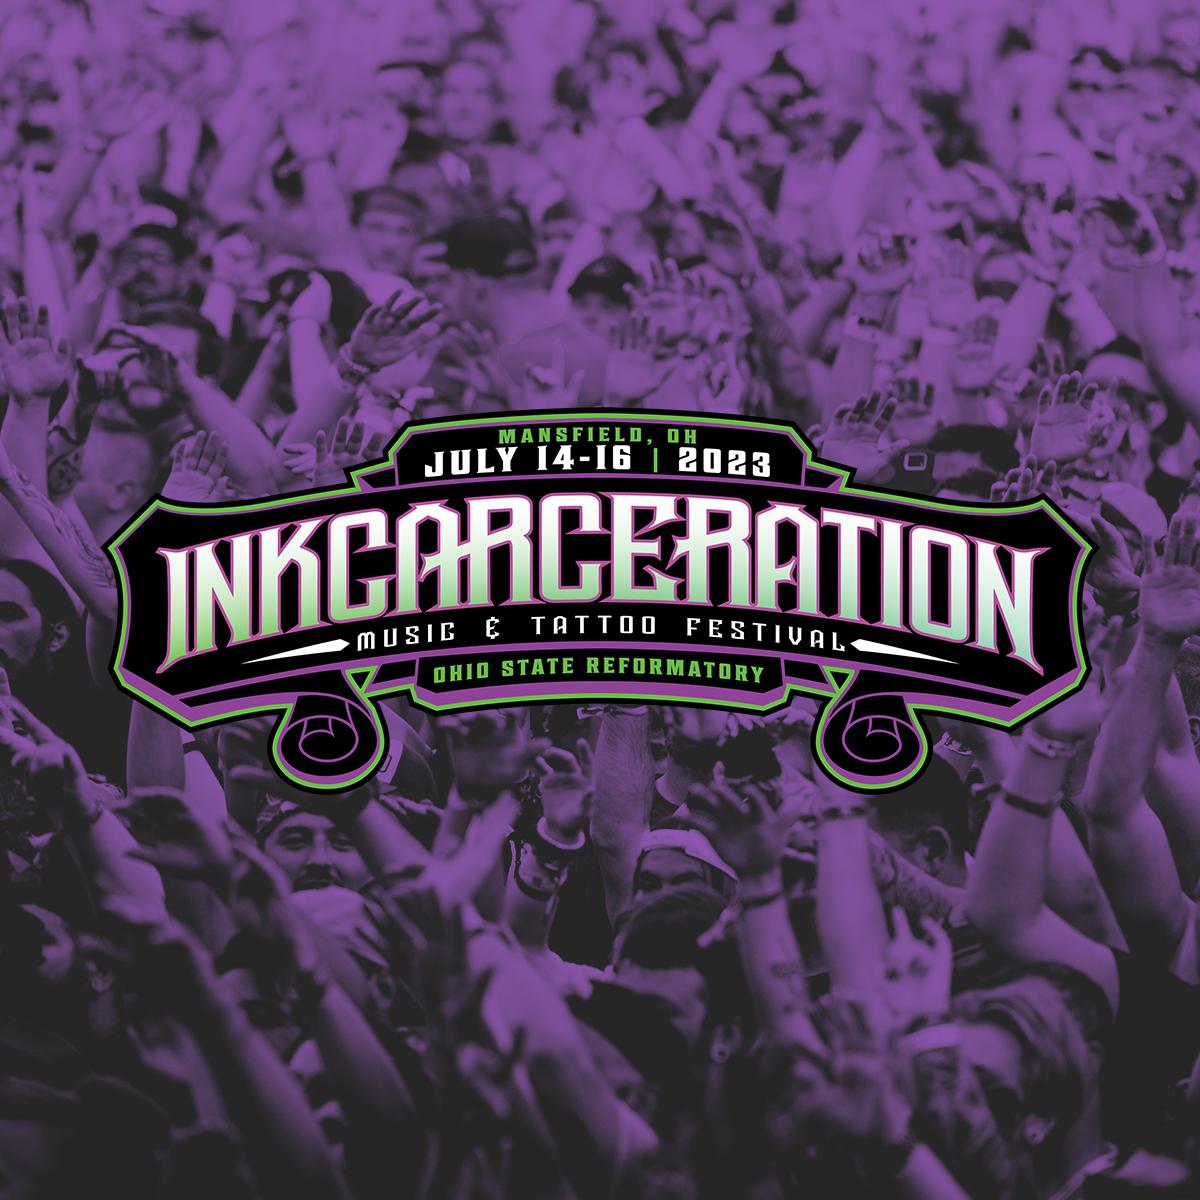 Inkcarceration Festival Festival Lineup, Dates and Location